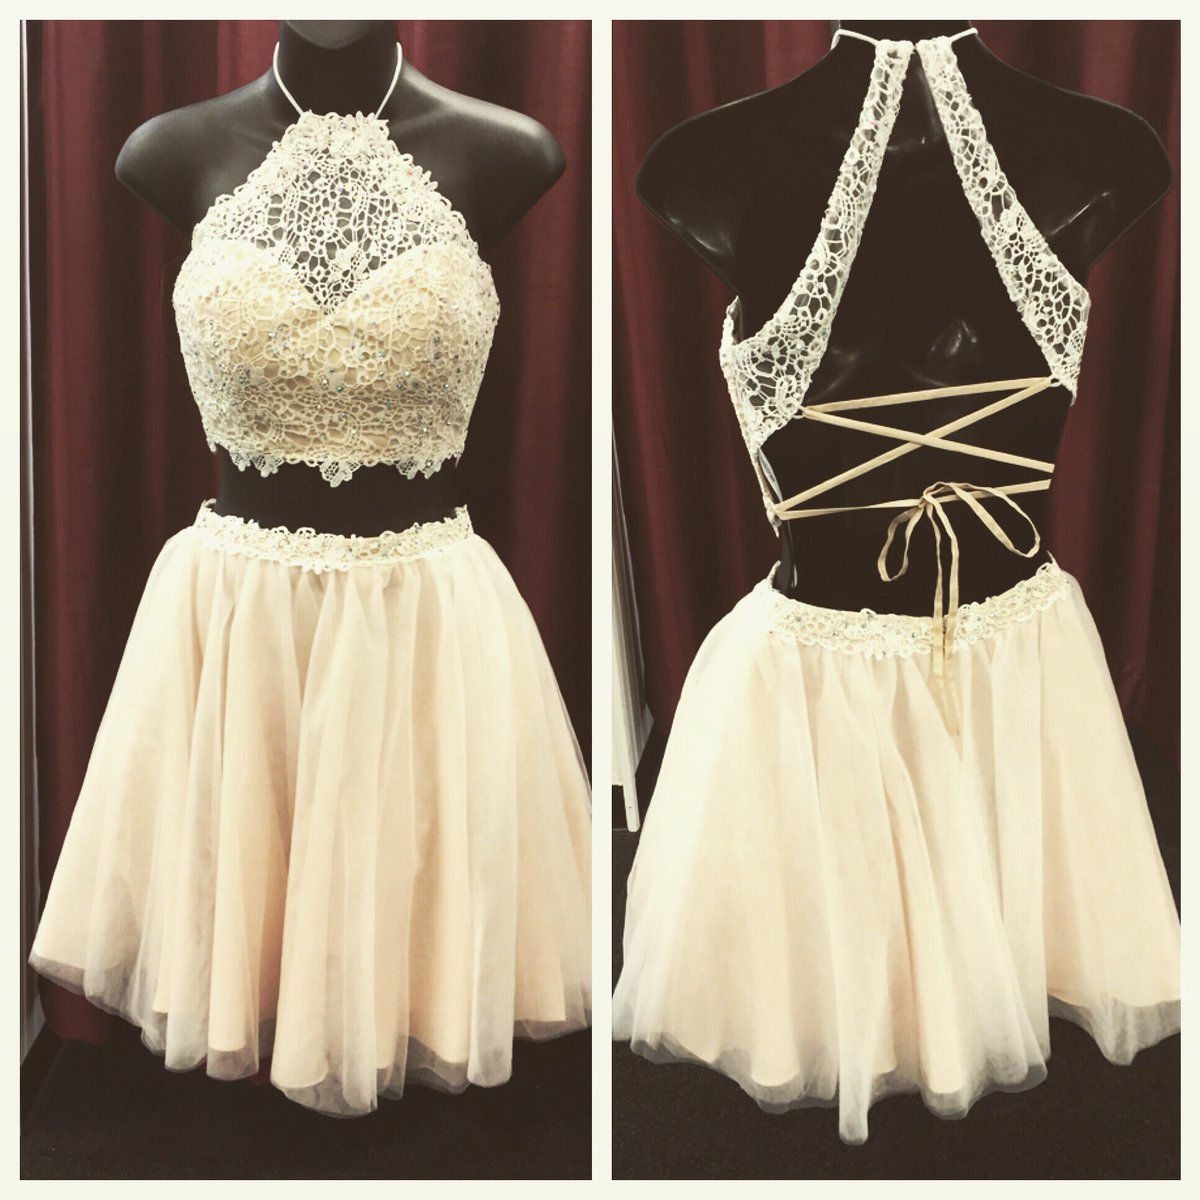 Hd60813 High Quality Homecoming Dress,lace Homecoming Dress,halter Graduation Dress,two Pieces Satin Prom Dress